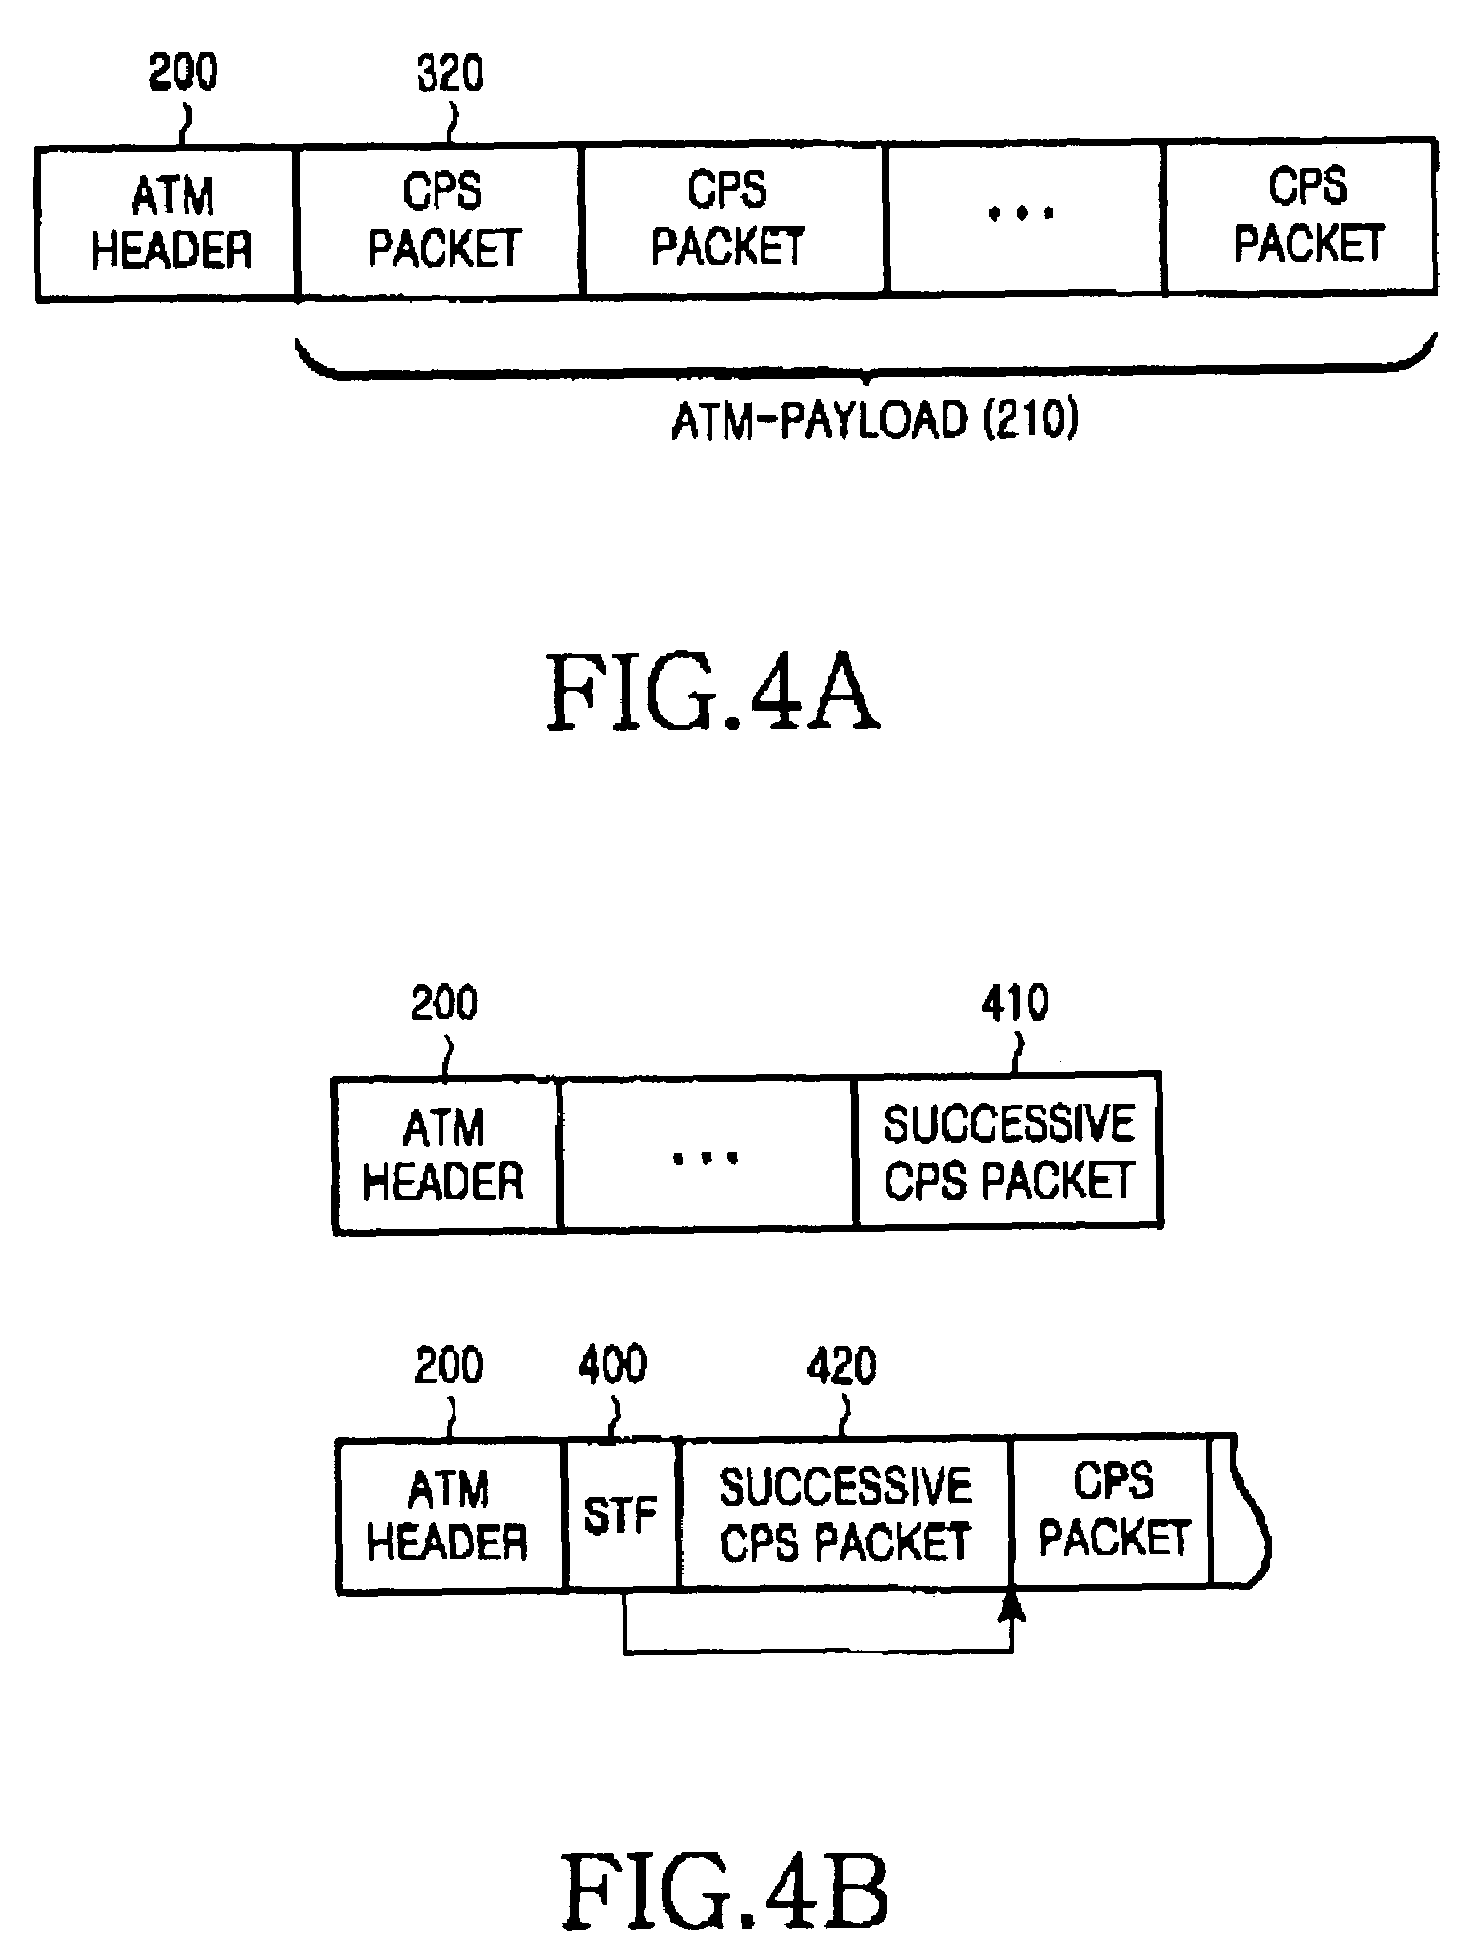 AAL2 switching apparatus and method